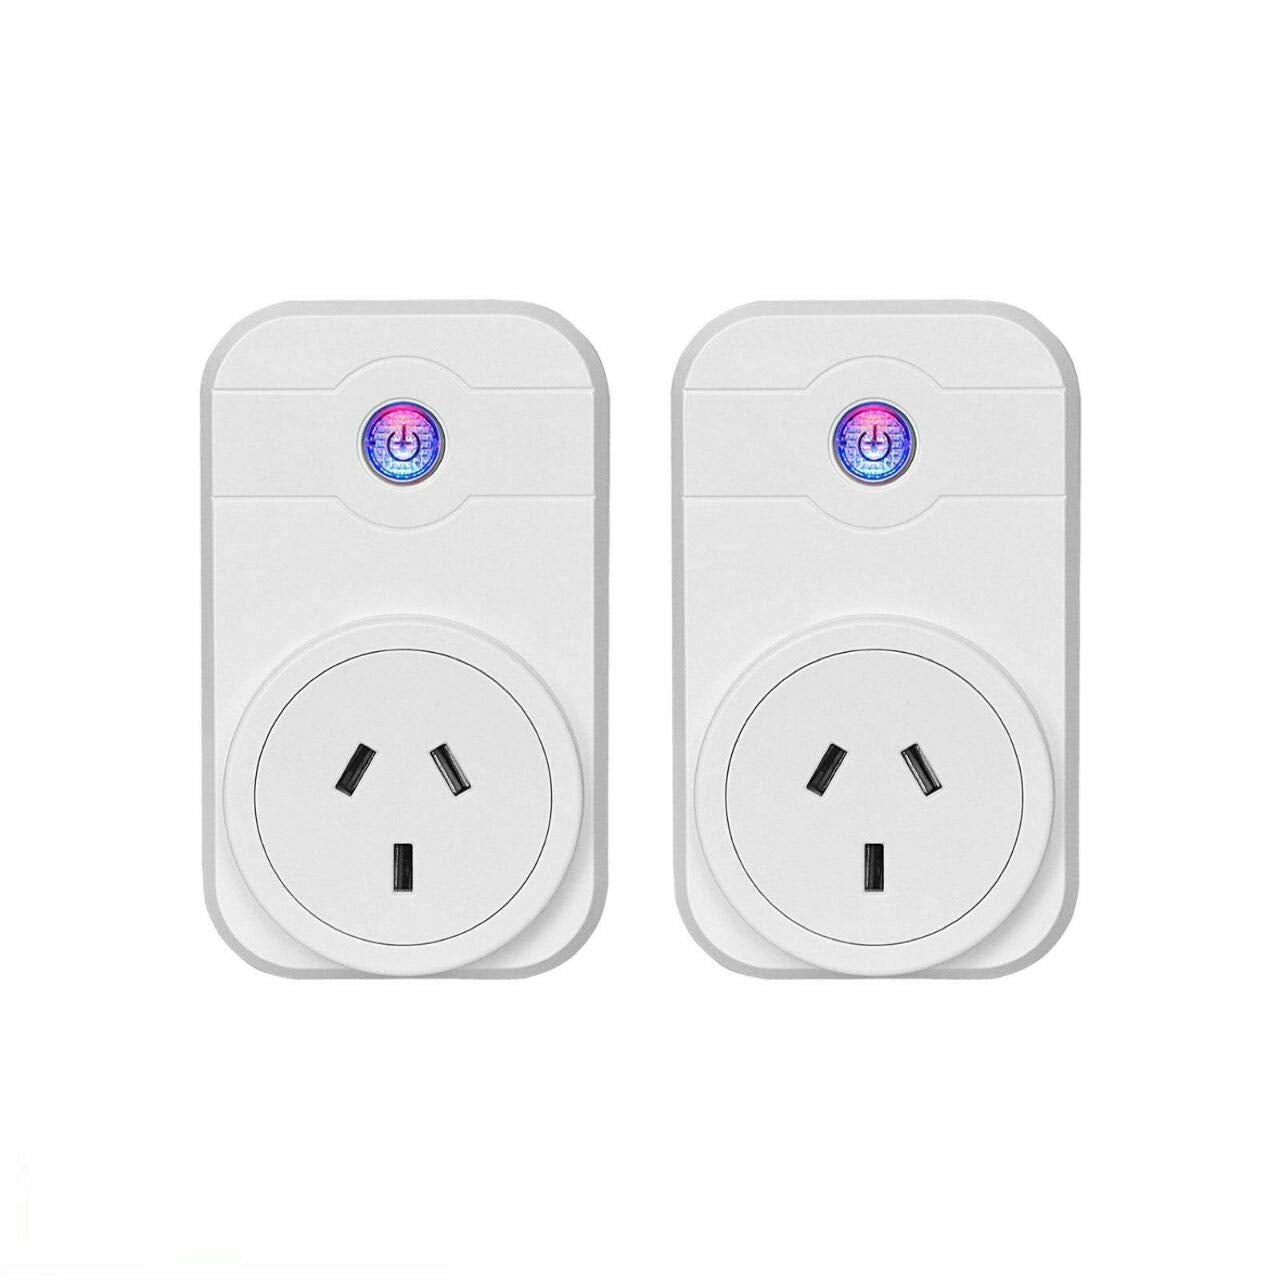 Smart Plug 4 Packs with Energy Monitor 16A - Smart Outlet 2.4Ghz Wi-Fi Plug  Work with Alexa&Google Home Assistant - Remote Control Plugs with Timer